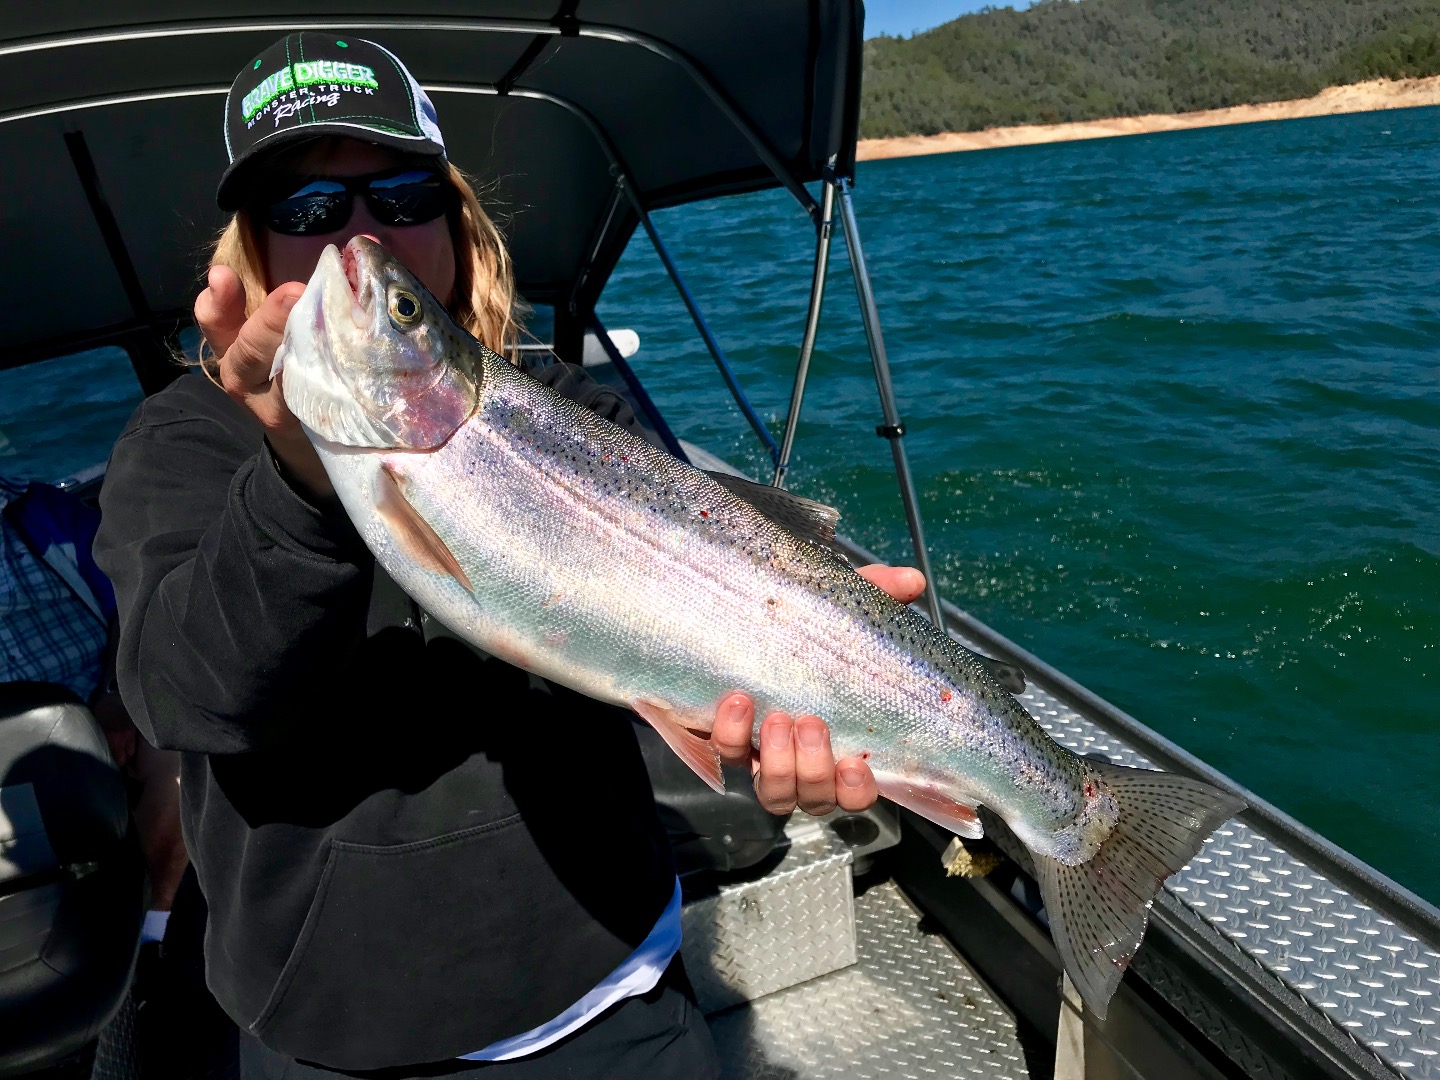 Shasta lake sees fall trout pattern.